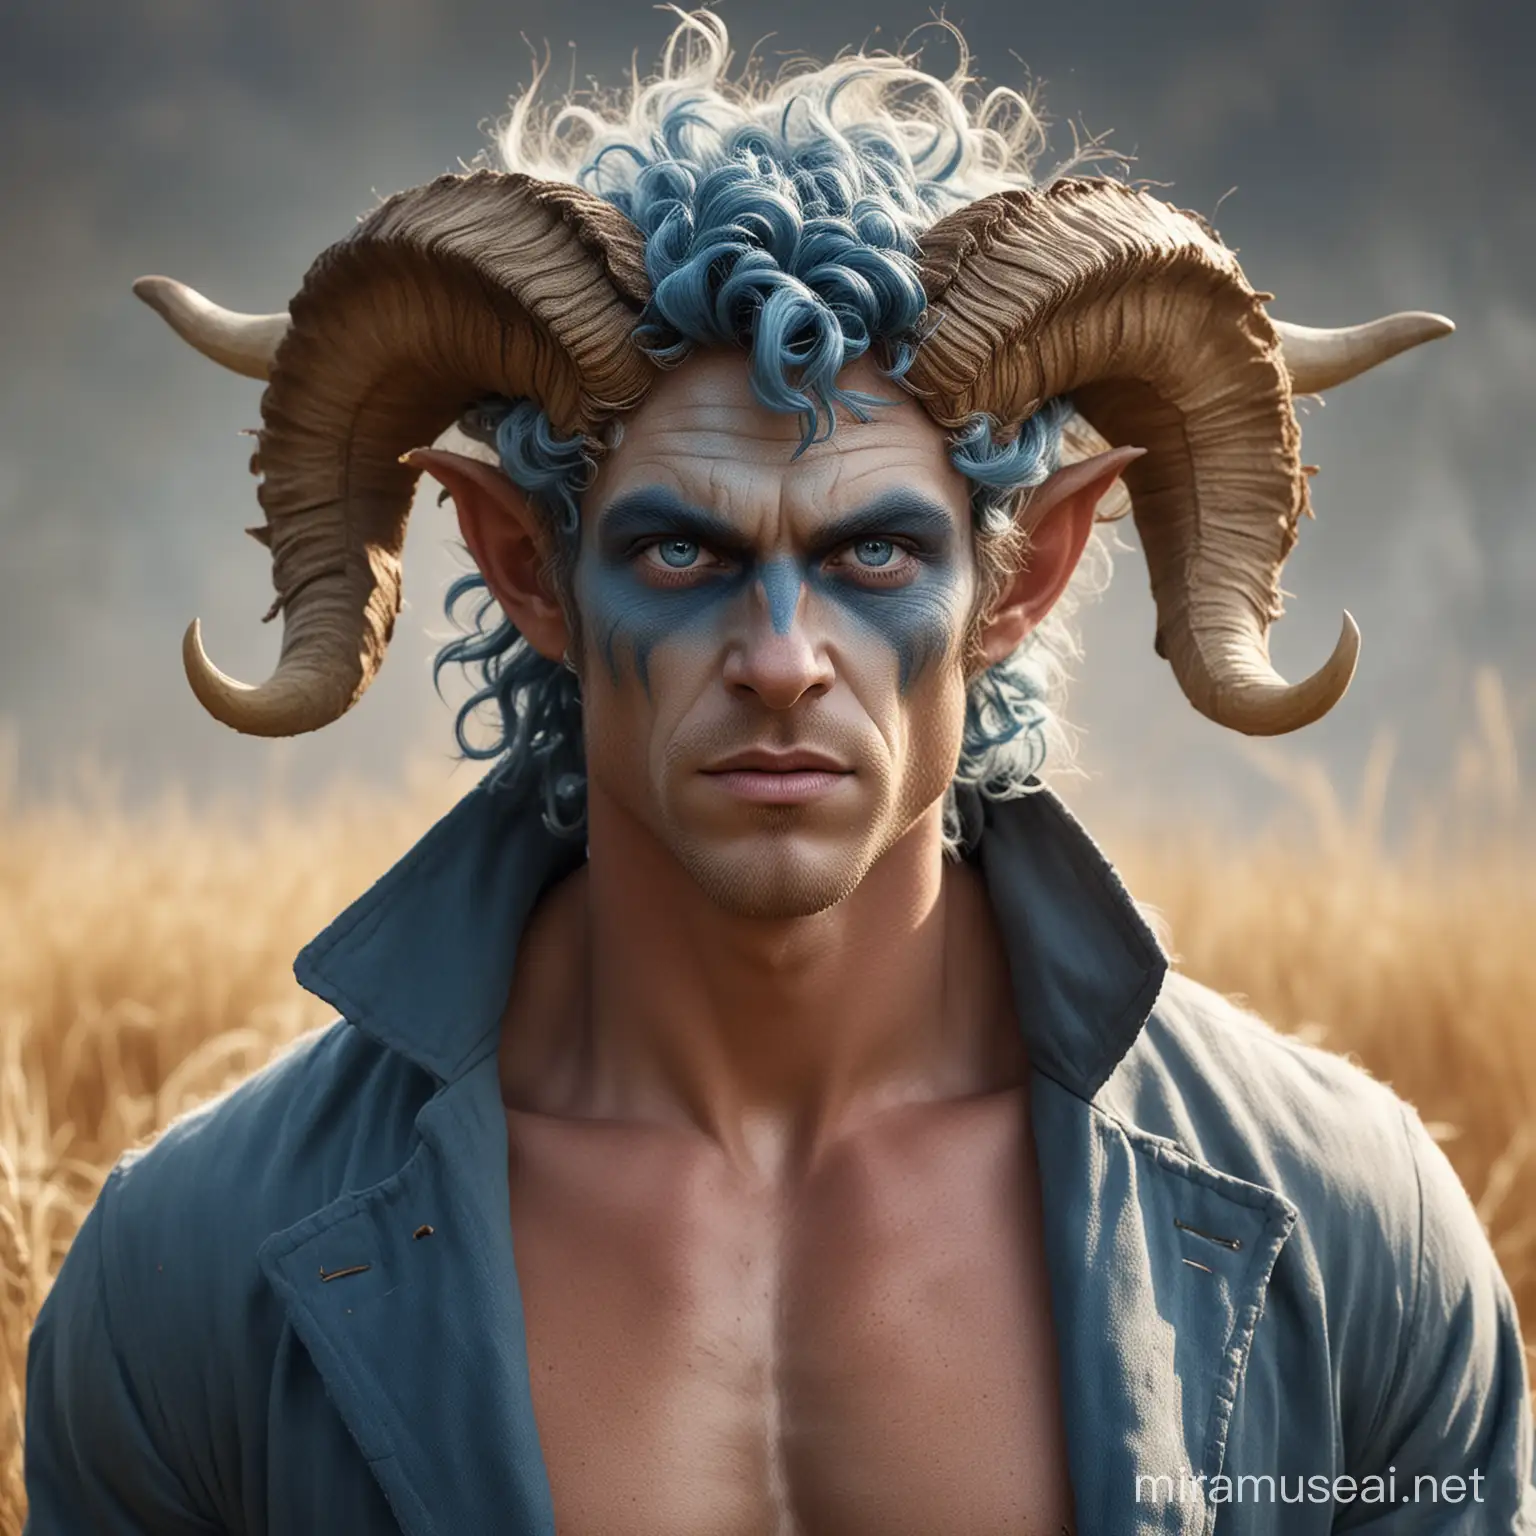 Mythical Faun Farmer with Curled Horns and Fantasy Attire